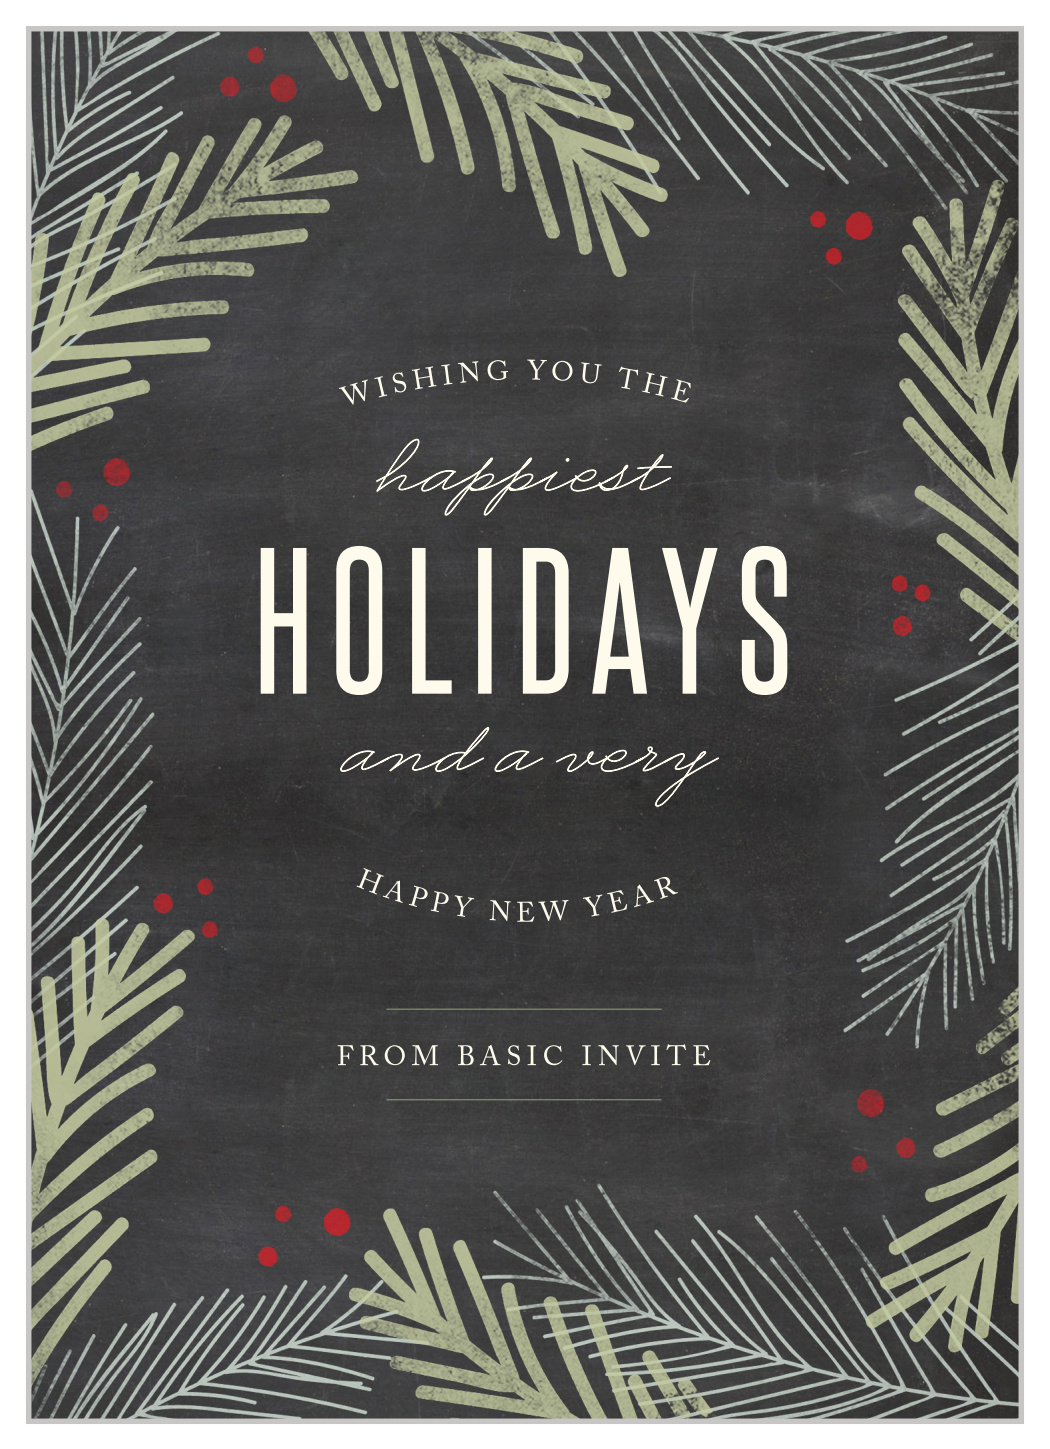 Holiday Vines Corporate Holiday Cards